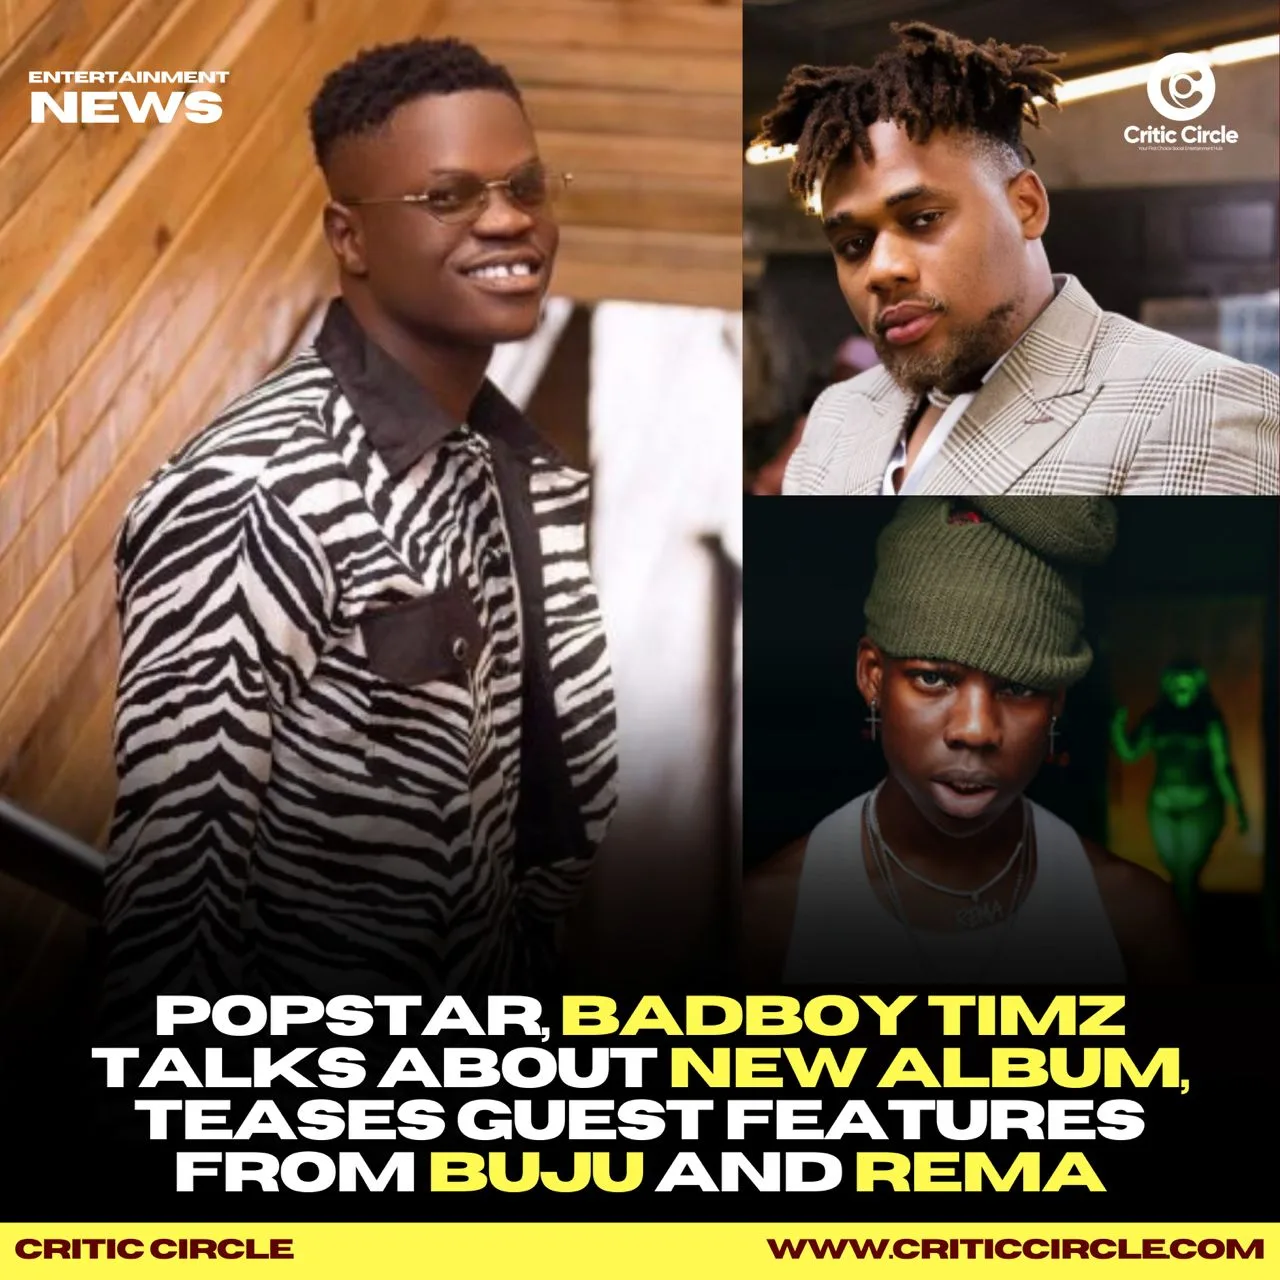 BadBoy-Timz-Talks-About-New-Album-Guest-Features-From-Buju-and-Rema